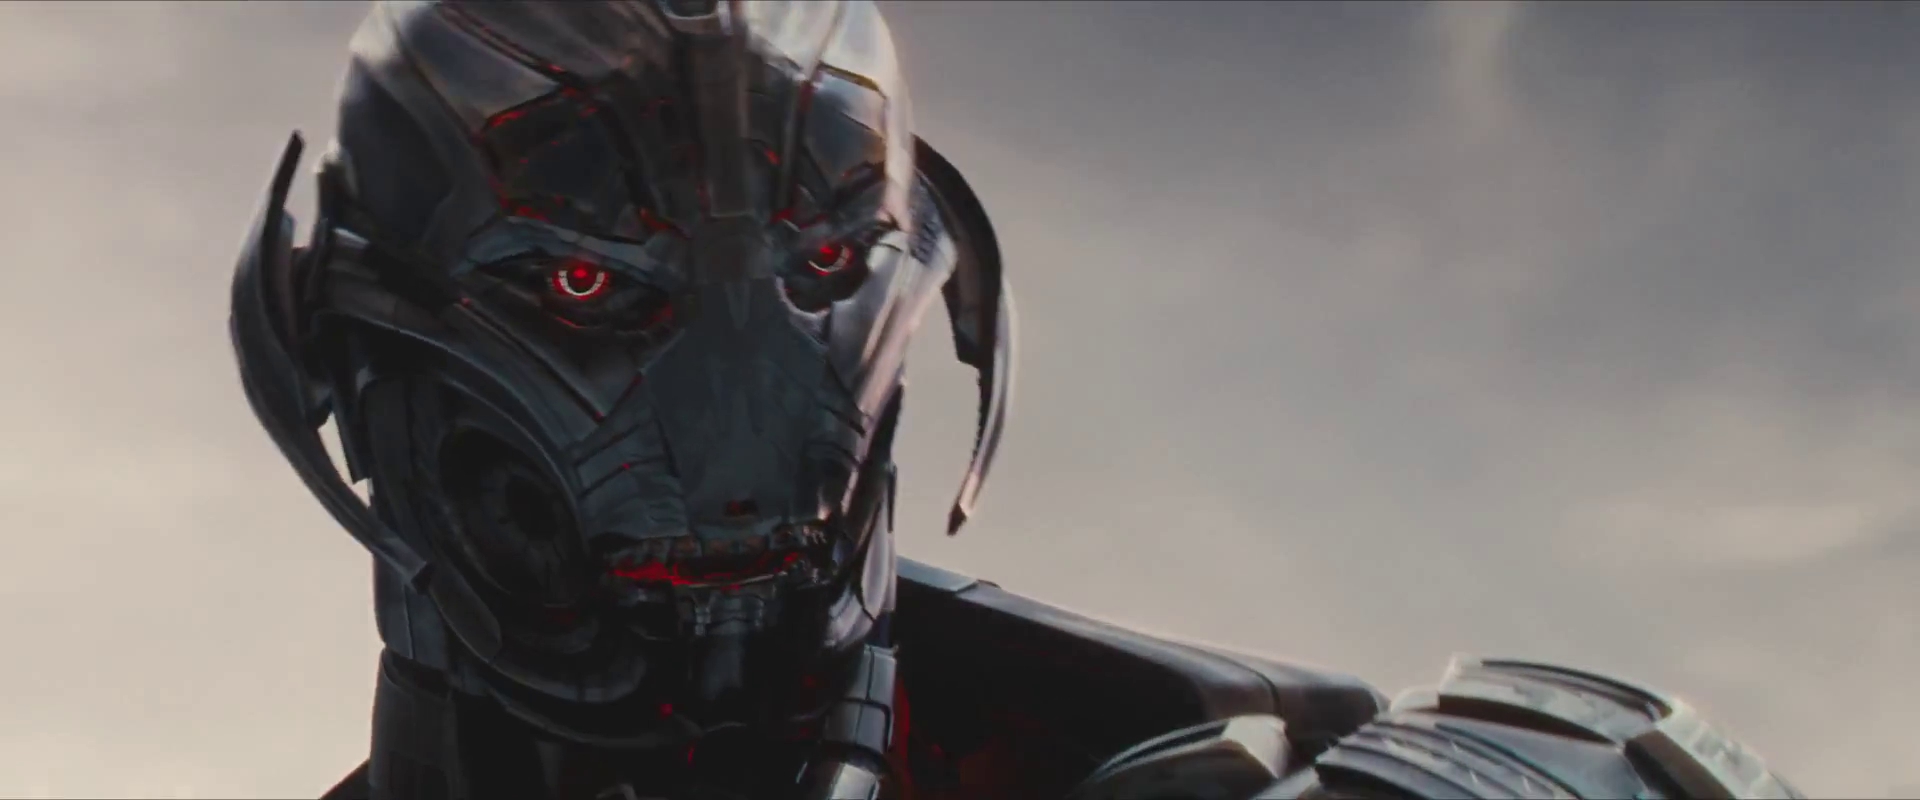 ultron, movie, avengers: age of ultron, the avengers wallpapers for tablet